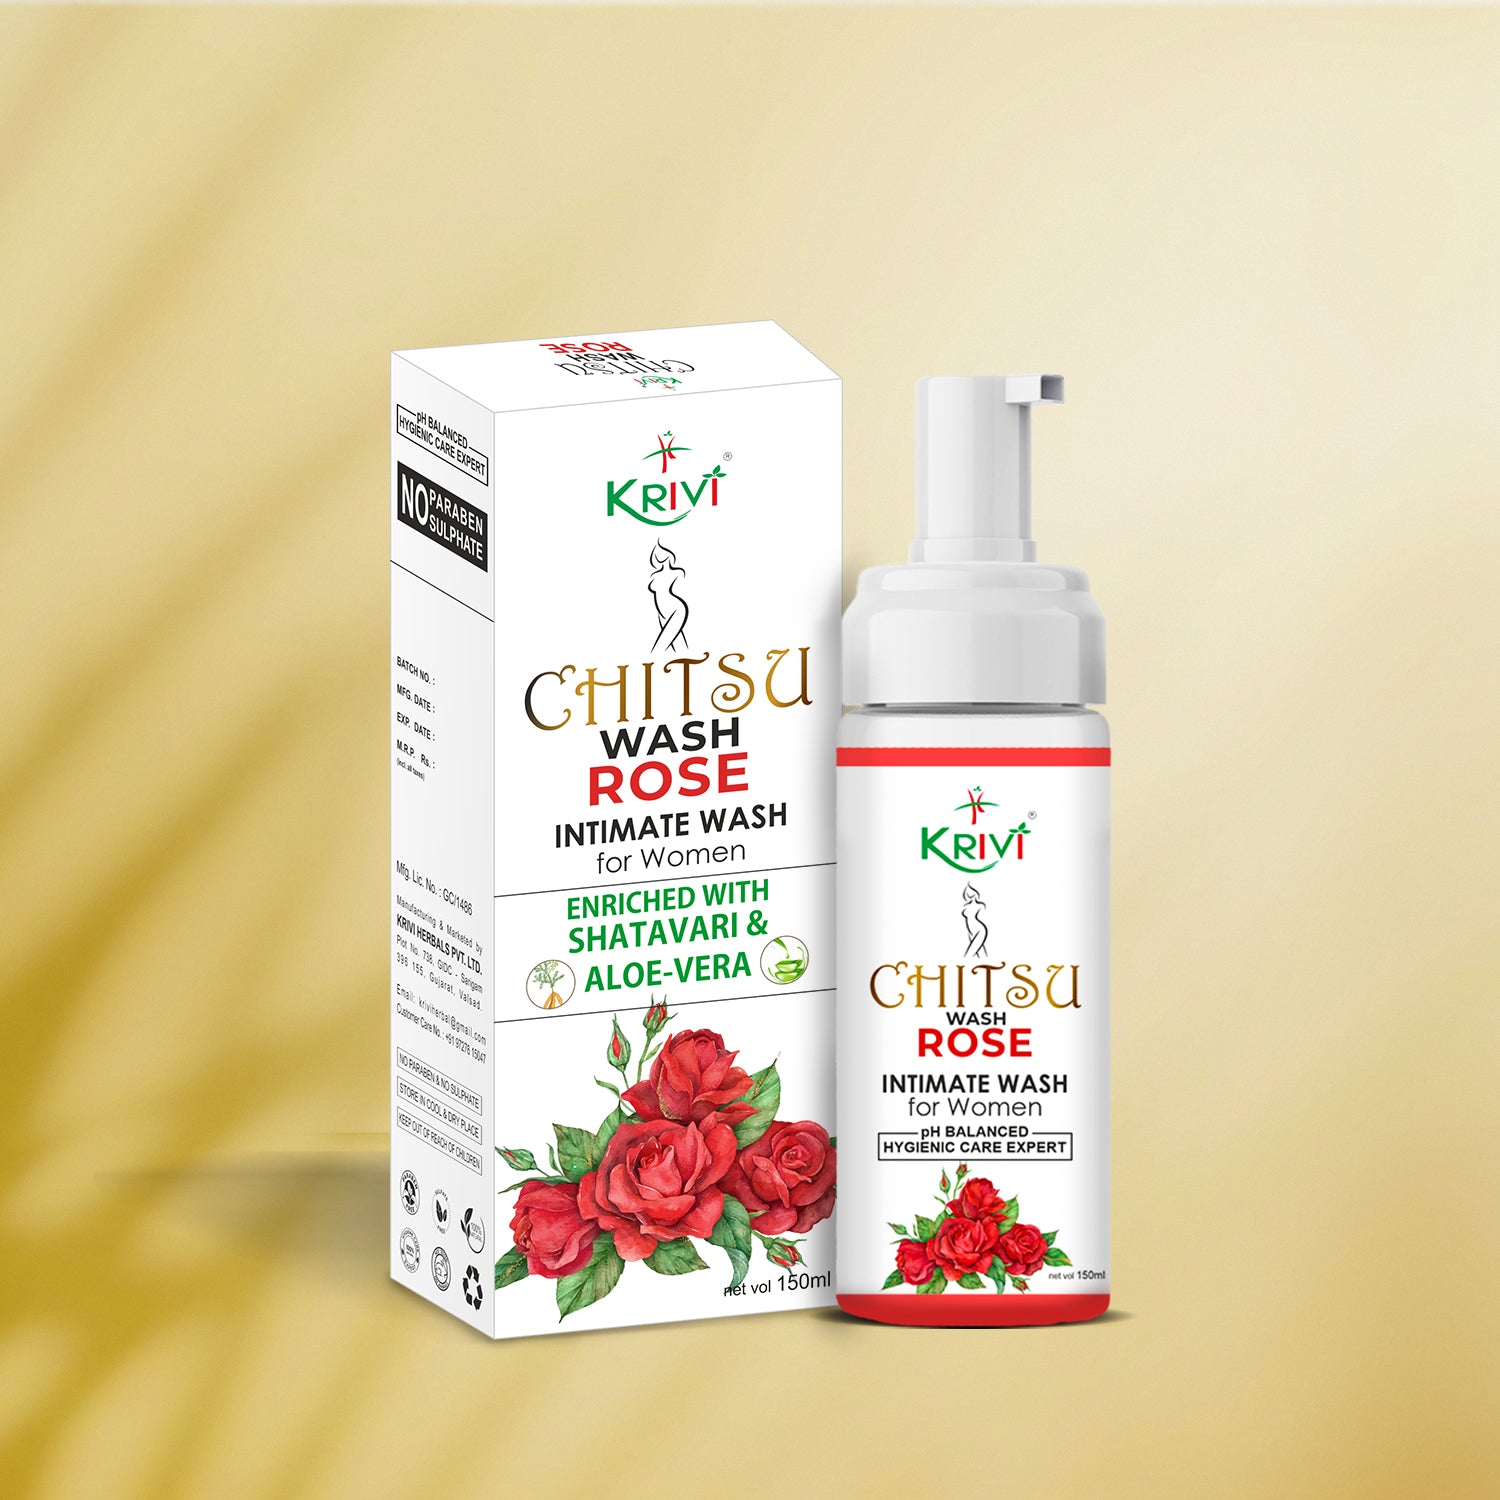 Chitsu Intimate Wash Rose for Women The hygiene care expert with goodness of Rose with Tree Tea Oil, Sea Buckthorn Oil, Shatavari and Aloe Vera 150 ml (Pack of 1)